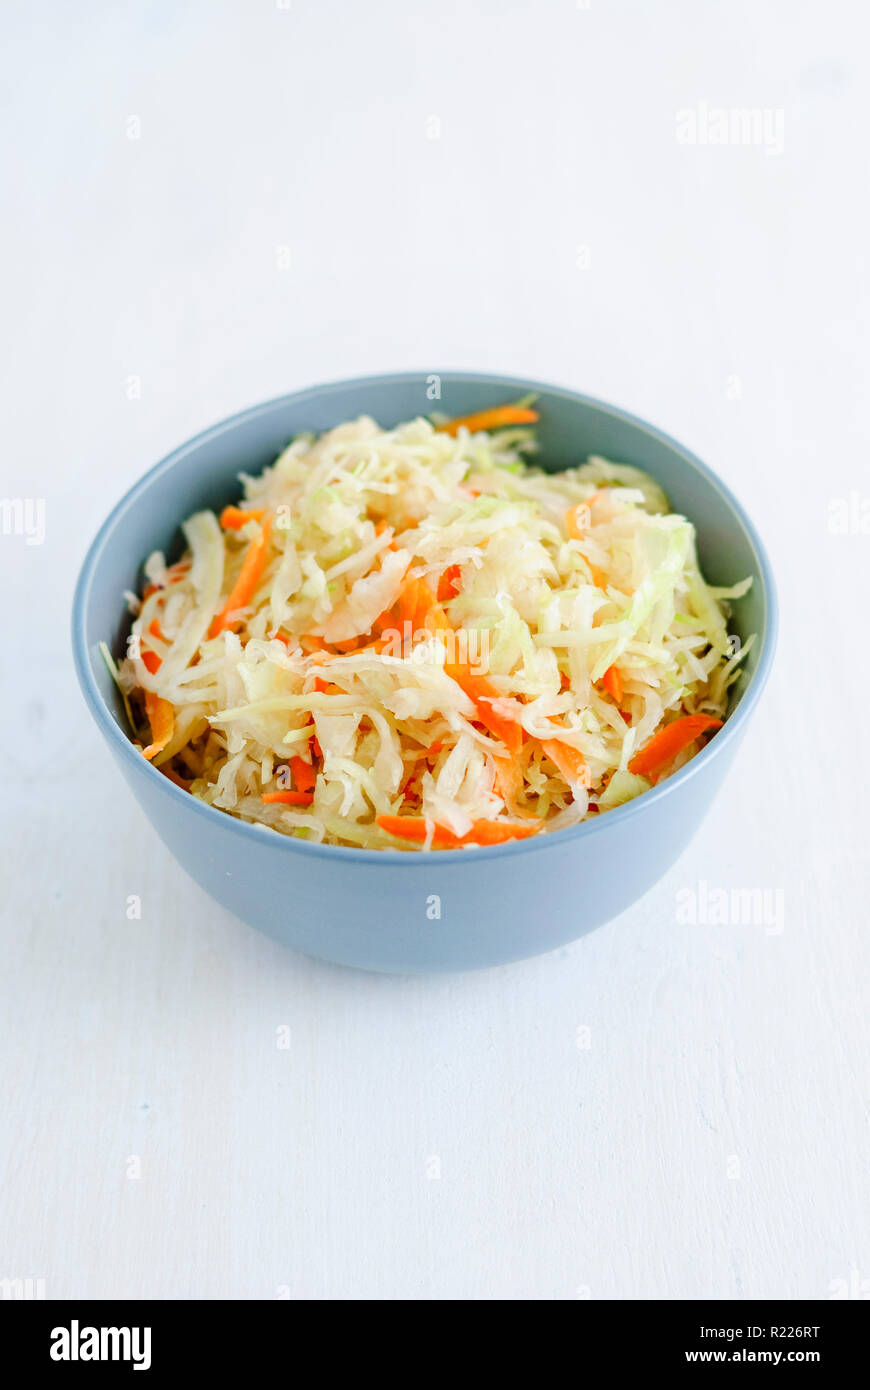 Bowl with fermented cabbage on napkin Stock Photo